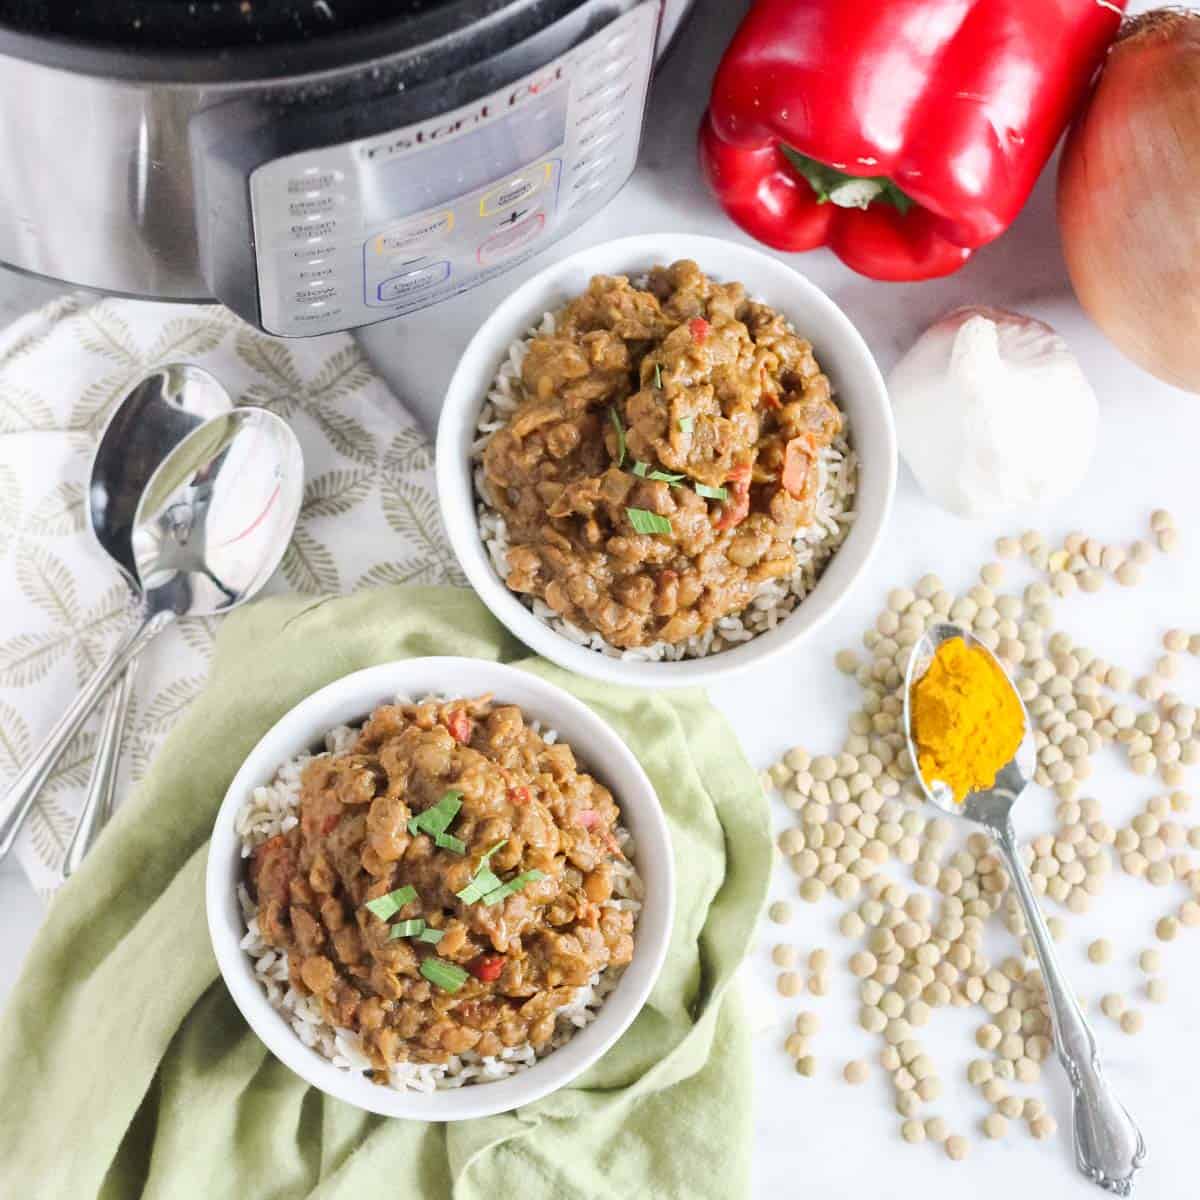 Instant Pot, two silver spoons, green napkins, white bowls with lentil curry and rice, spoon with turmeric, scattered green lentils, red bell pepper, garlic, and onion.